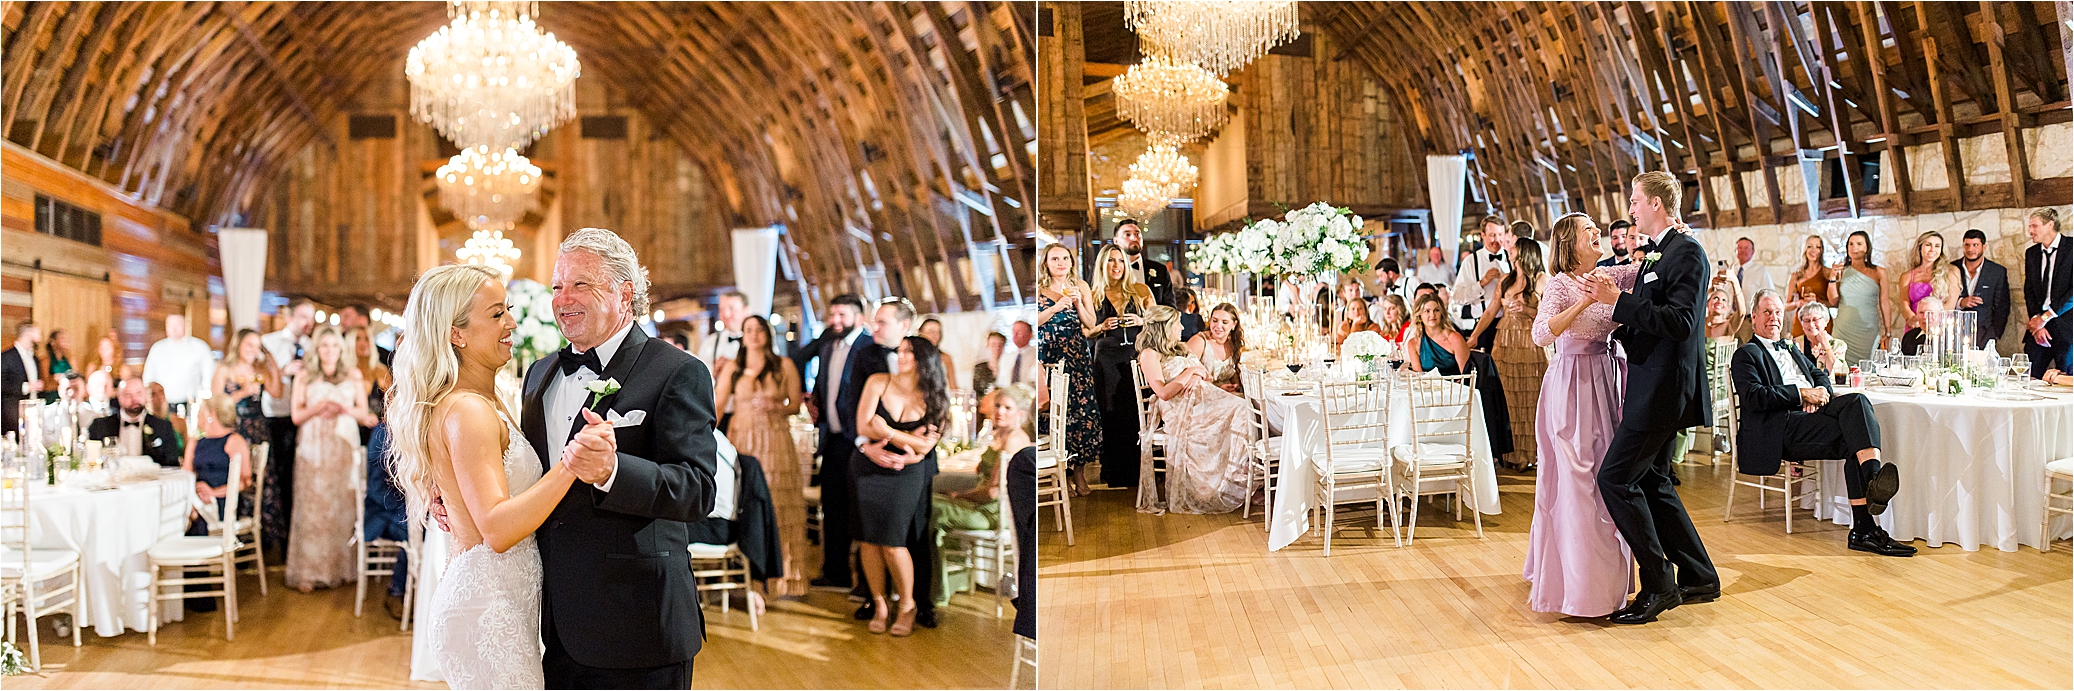 A bride dances with her dad and groom with his mom as they smile inside a large brown barn with chandeliers in the background at their Austin, Texas wedding venue Brodie Homestead